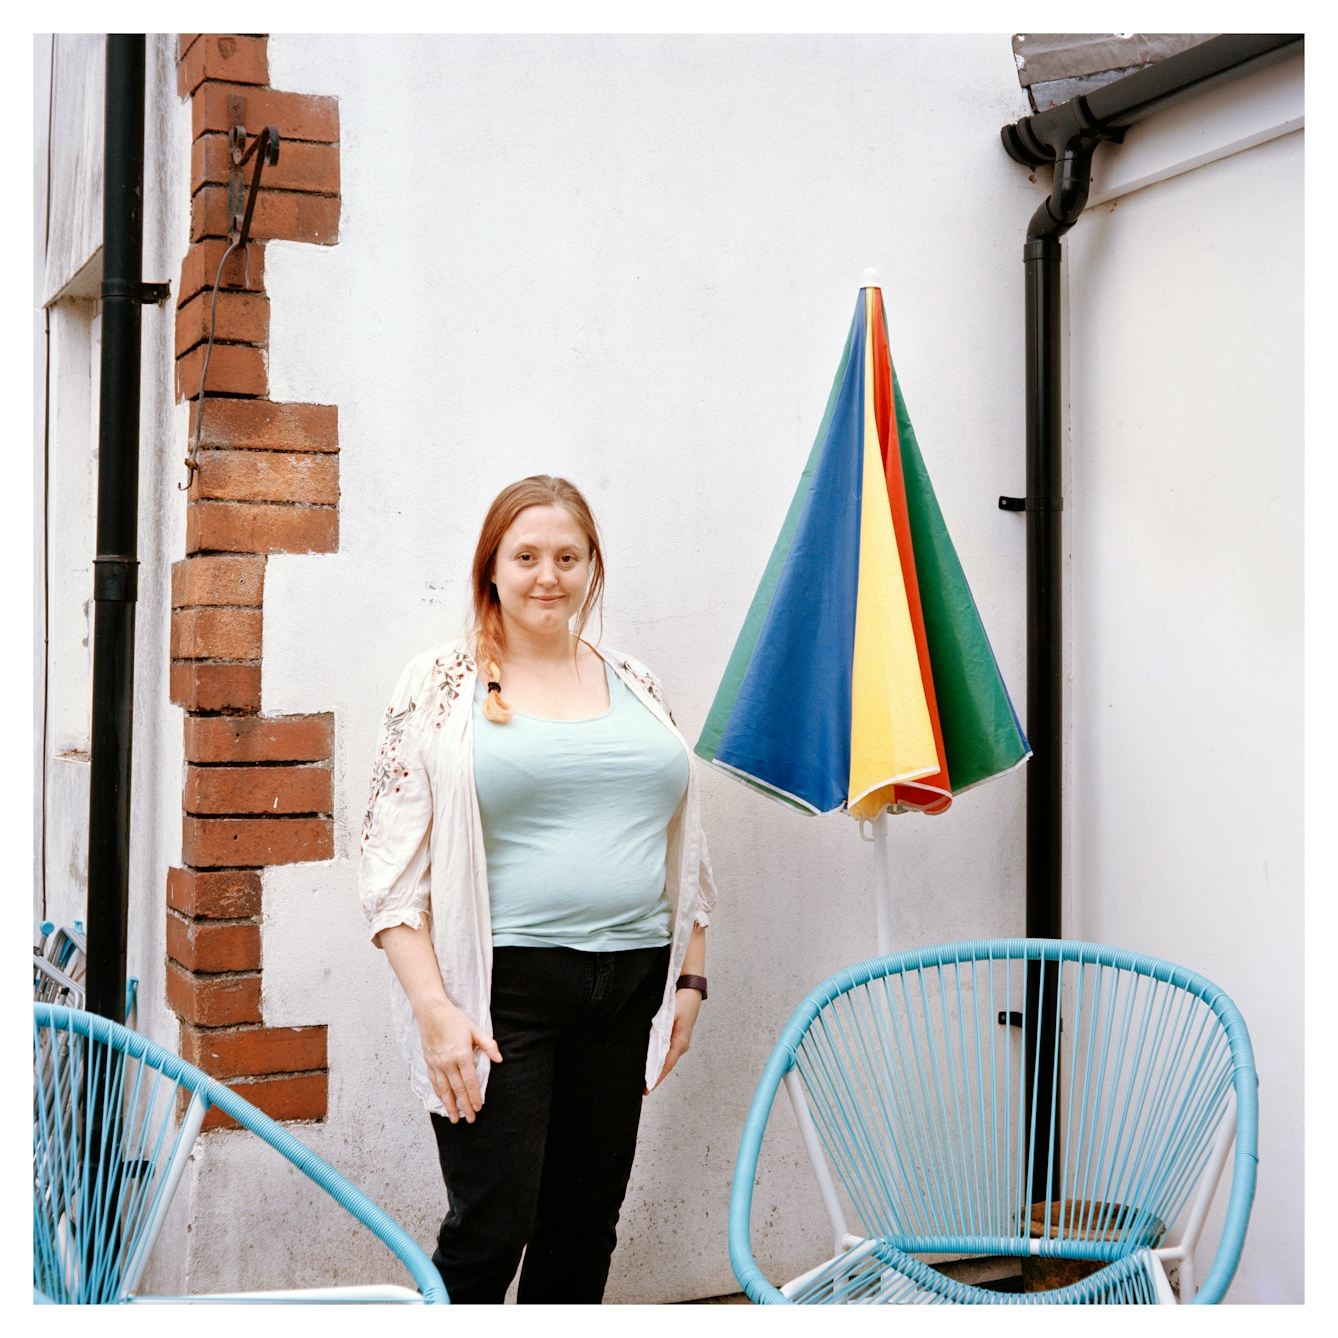 Portrait photograph of Jayne, a woman with blonde and red hair, standing in front of a white painted brick wall. Her hair is in a side braid and she is wearing a light blue t-shirt, a white floral cardigan and black trousers. 

Her hands are by her side and she is looking directly at the camera with a slight smile. There is a colourful patio umbrella next to her and several blue beach chairs. 